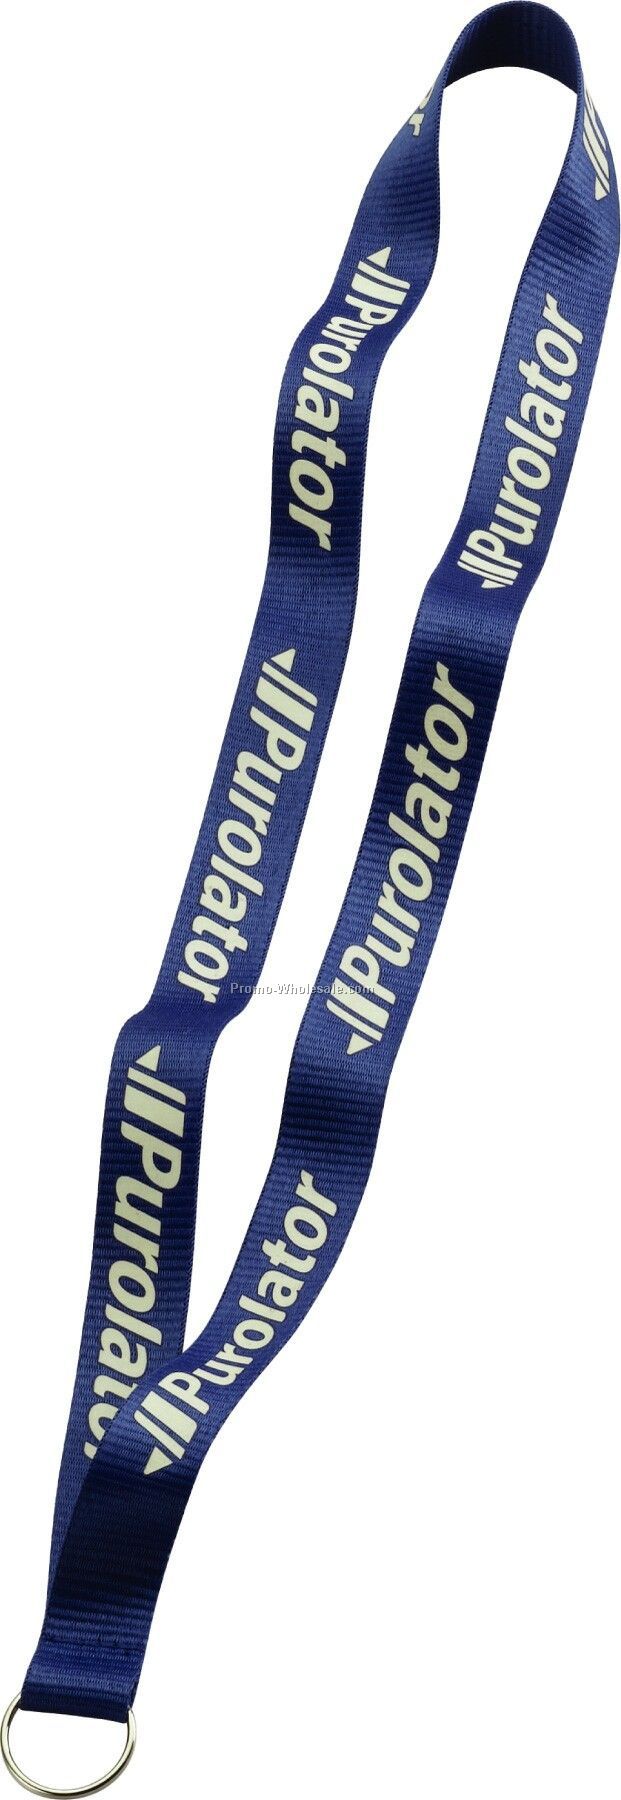 3/4" Imported Polyester Glow Imprint Lanyard With Sewn Split Ring